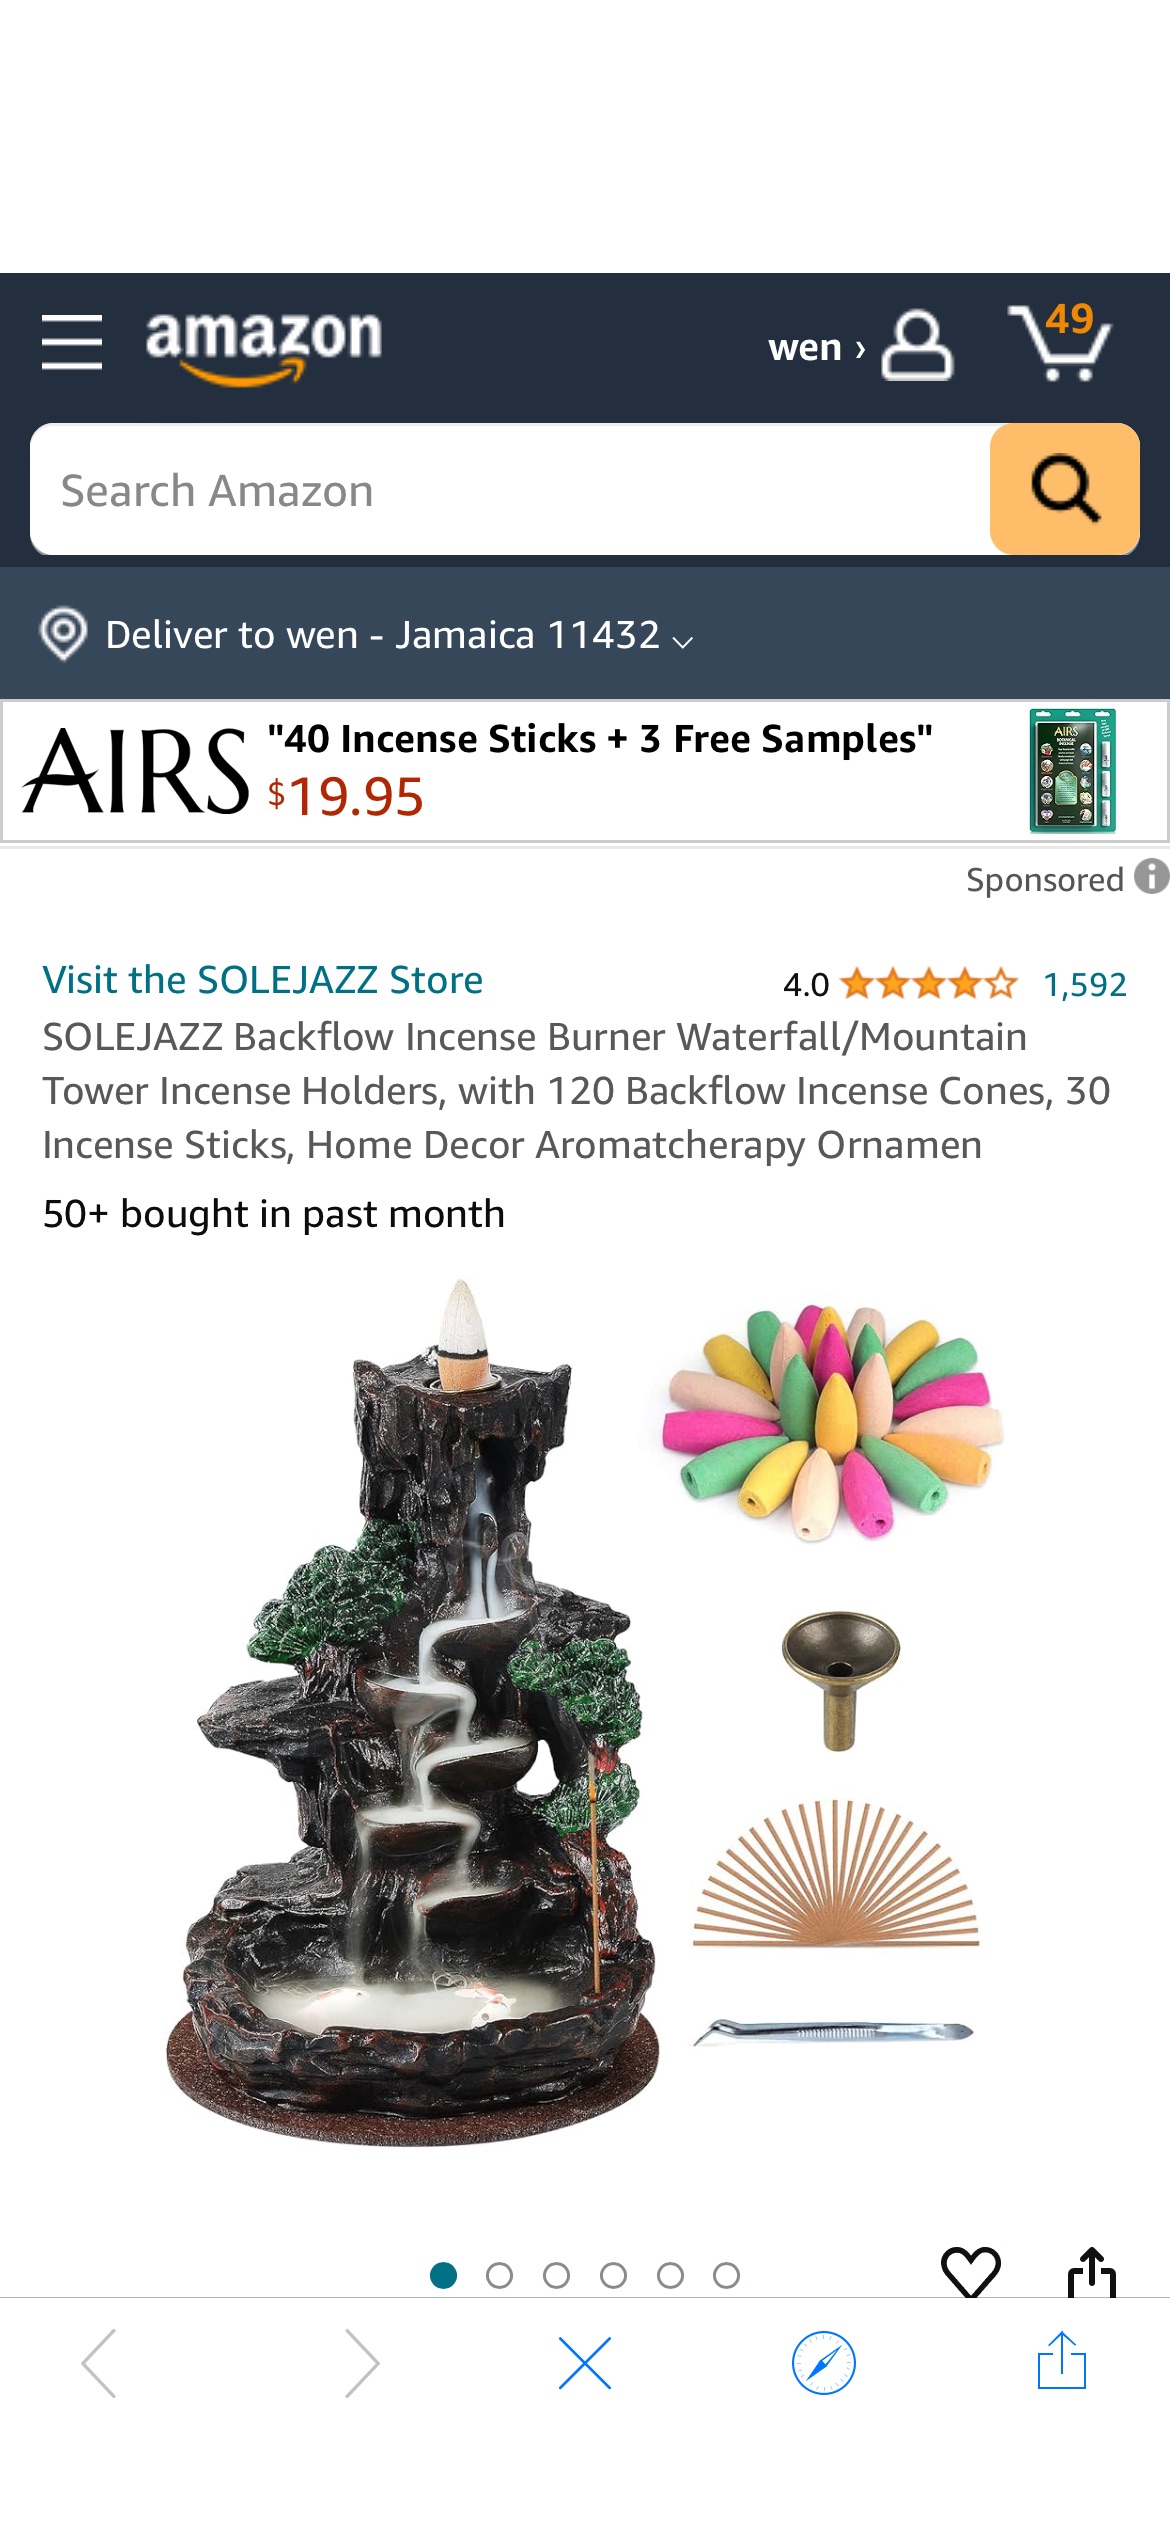 Amazon.com: SOLEJAZZ Backflow Incense Burner Waterfall/Mountain Tower Incense Holders, with 120 Backflow Incense Cones, 30 Incense Sticks, Home Decor Aromatcherapy Ornamen : Home & Kitchen